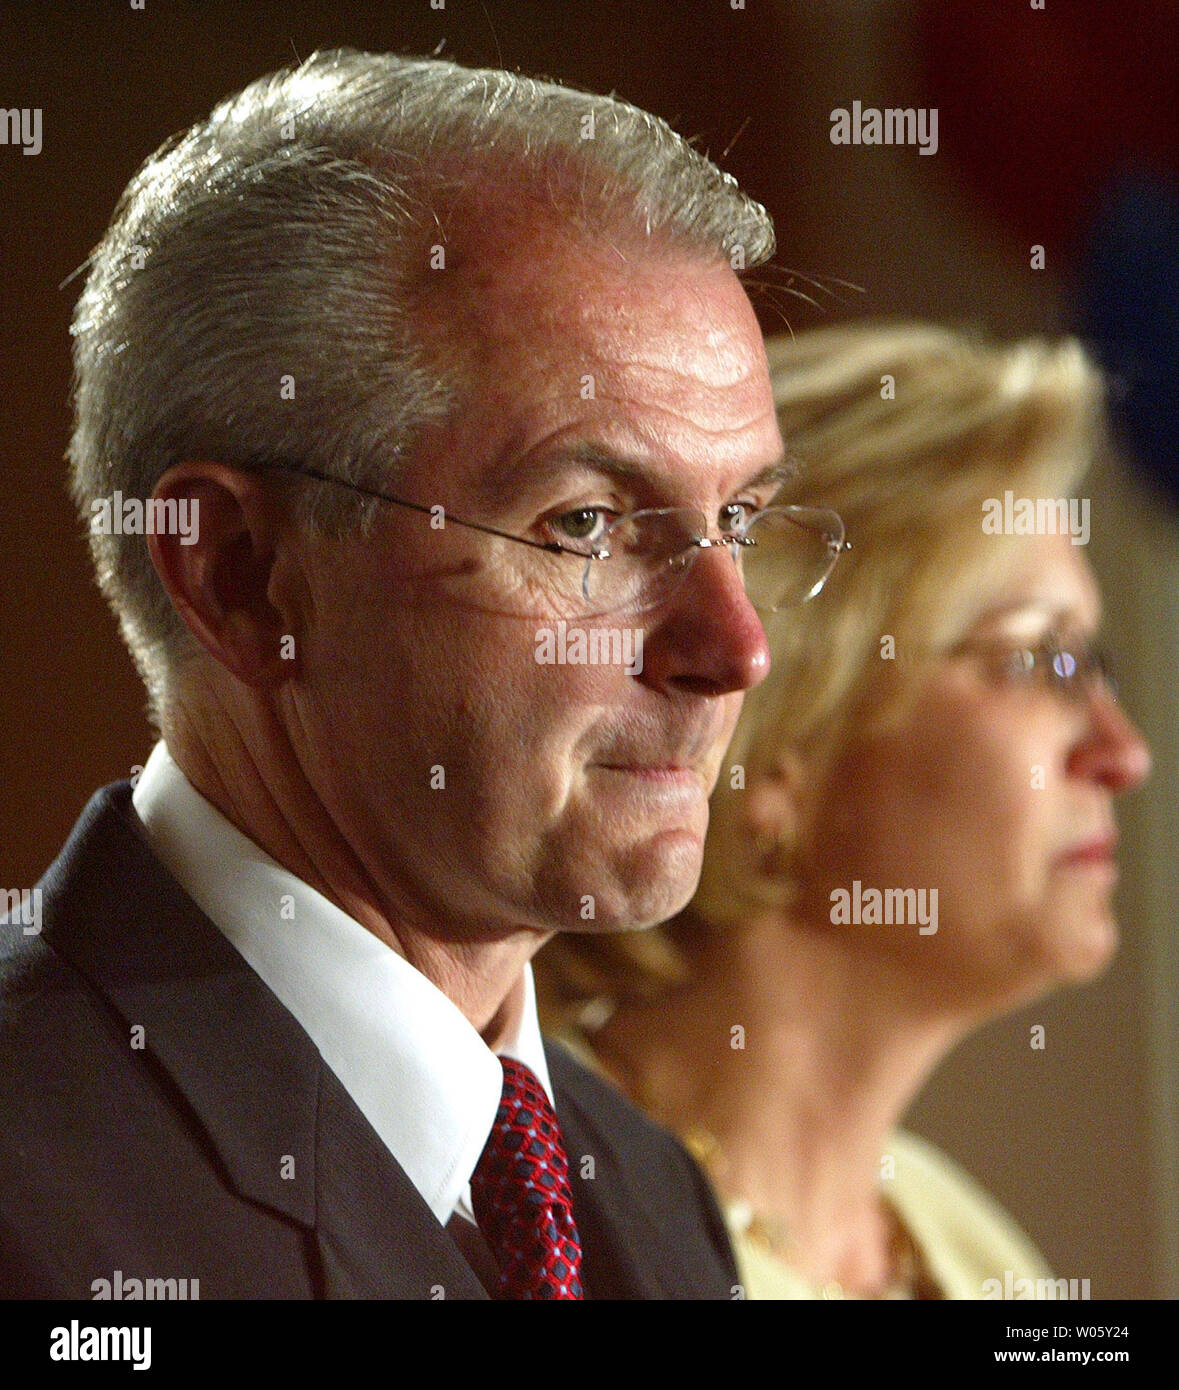 A tearful Missouri Gov. Bob Holden and wife Lori Hauser Holden pause during a moment of applause during a concession speech at the Electrical Workers Hall in St. Louis on August 3, 2004.  Holden lost a tight race with state auditor Claire McCaskill in the Democratic primary.  (UPI Photo/Bill Greenblatt) Stock Photo